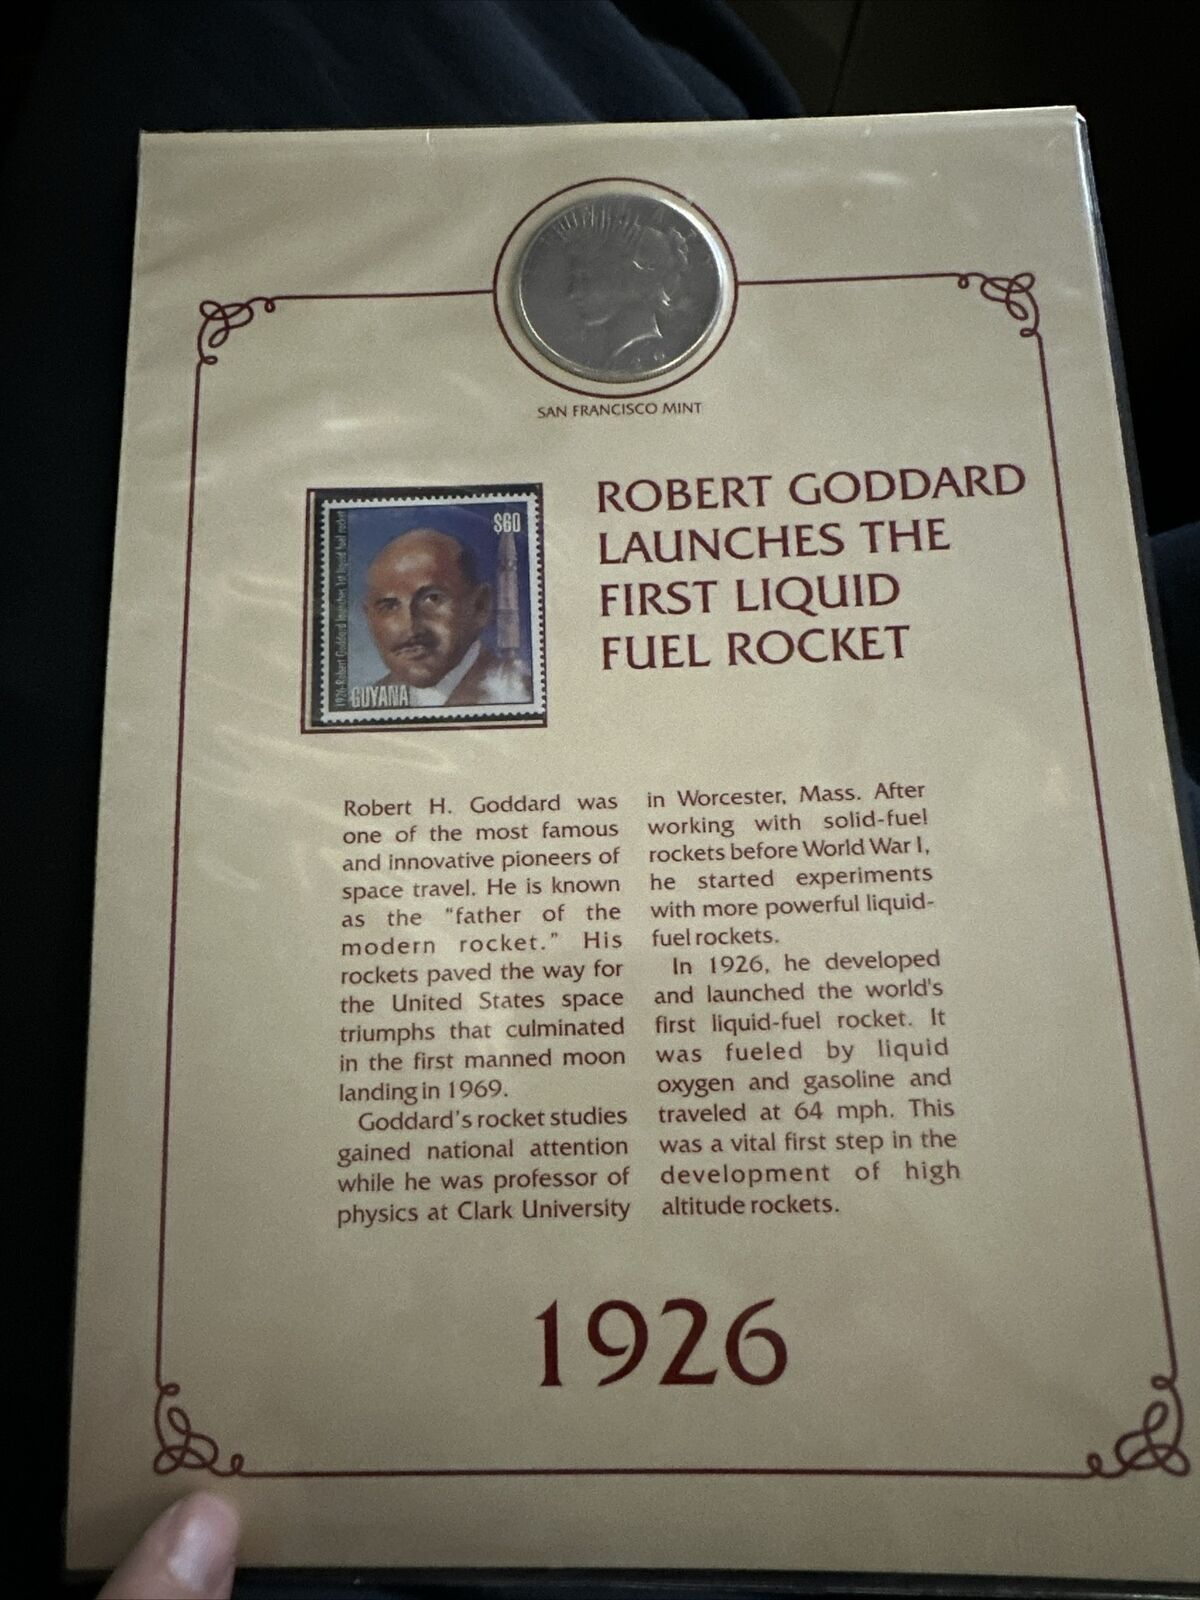 Robert Goddard launches the first liquid fuel rocket coin and stamp. 1926